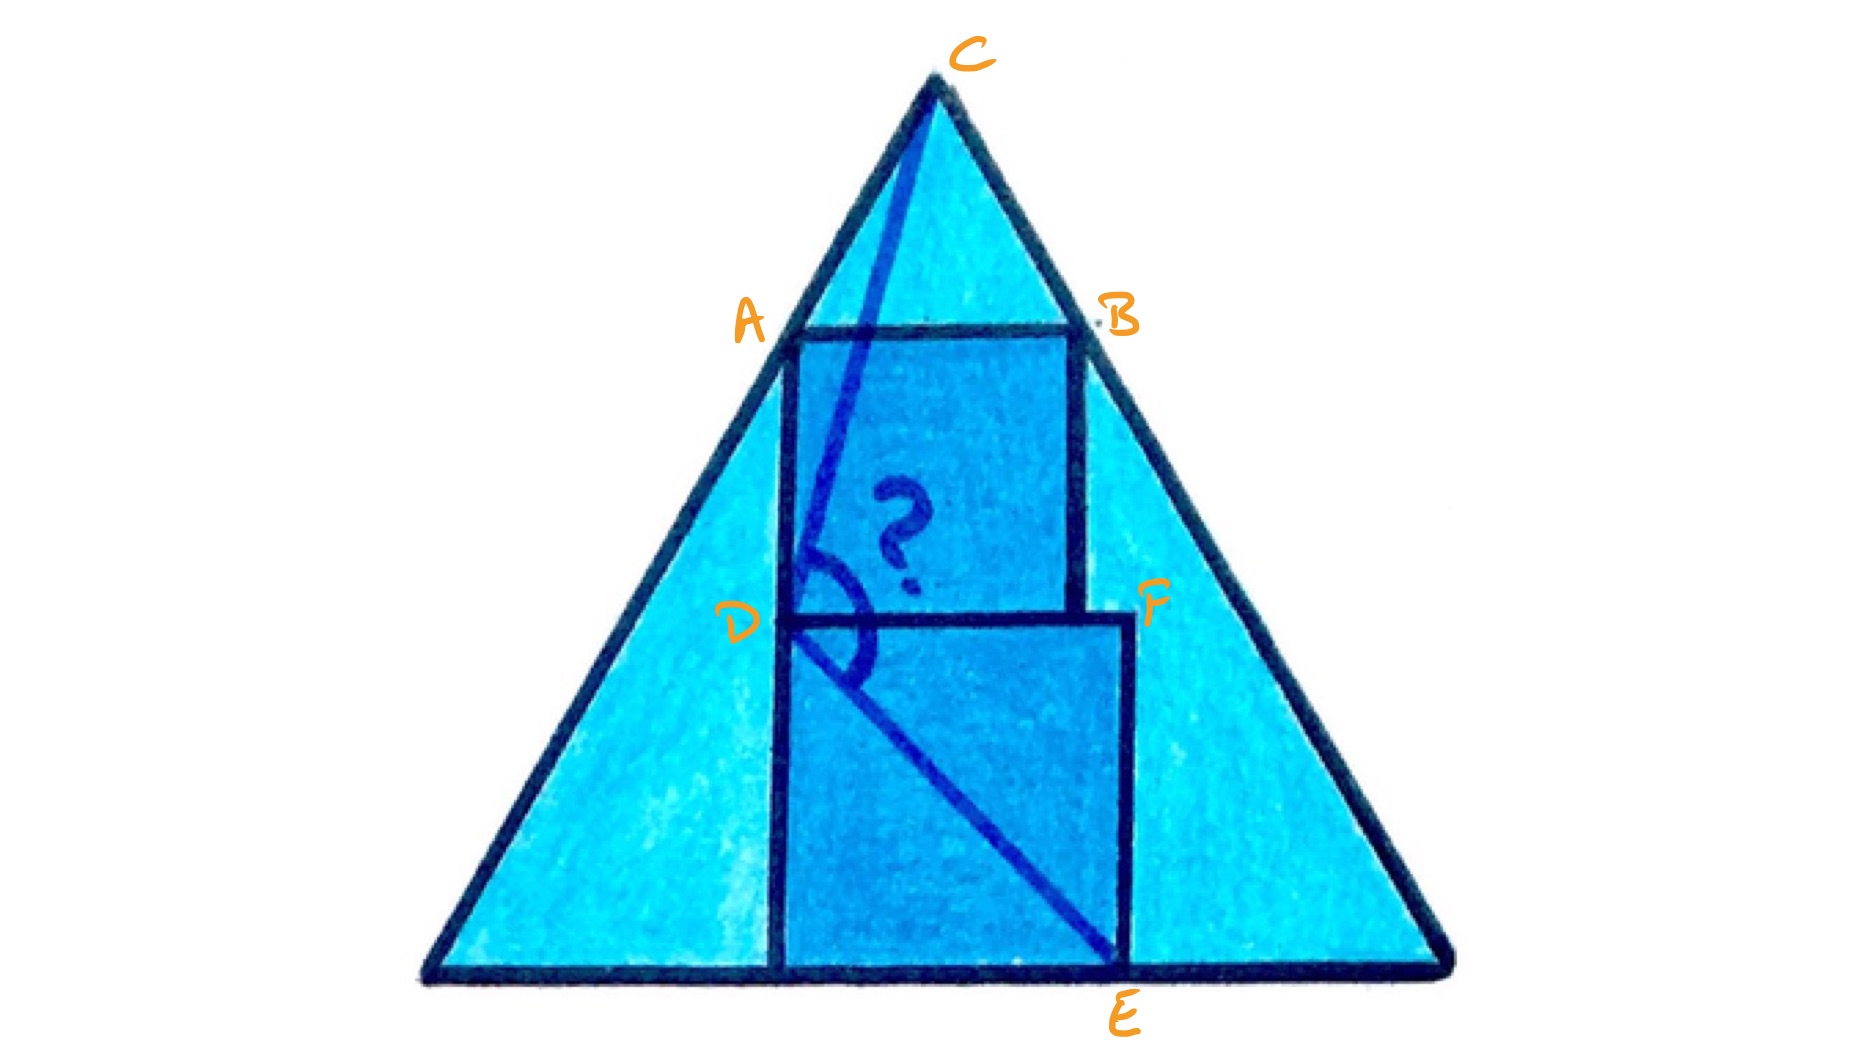 Two squares inside an equilateral triangle labelled